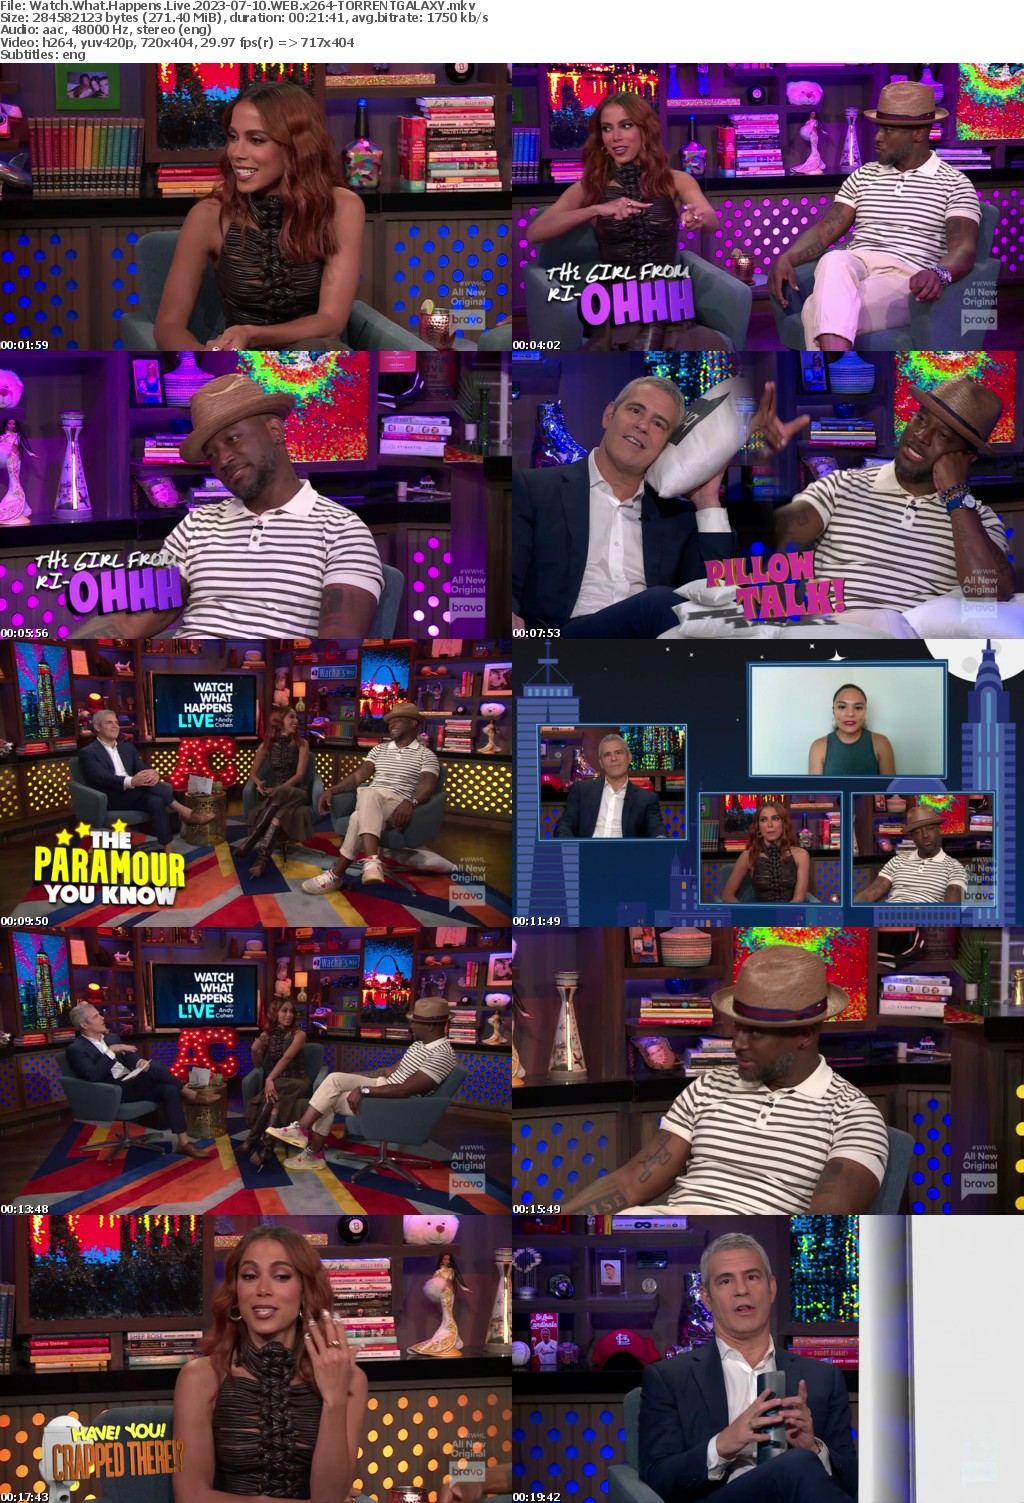 Watch What Happens Live 2023-07-10 WEB x264-GALAXY